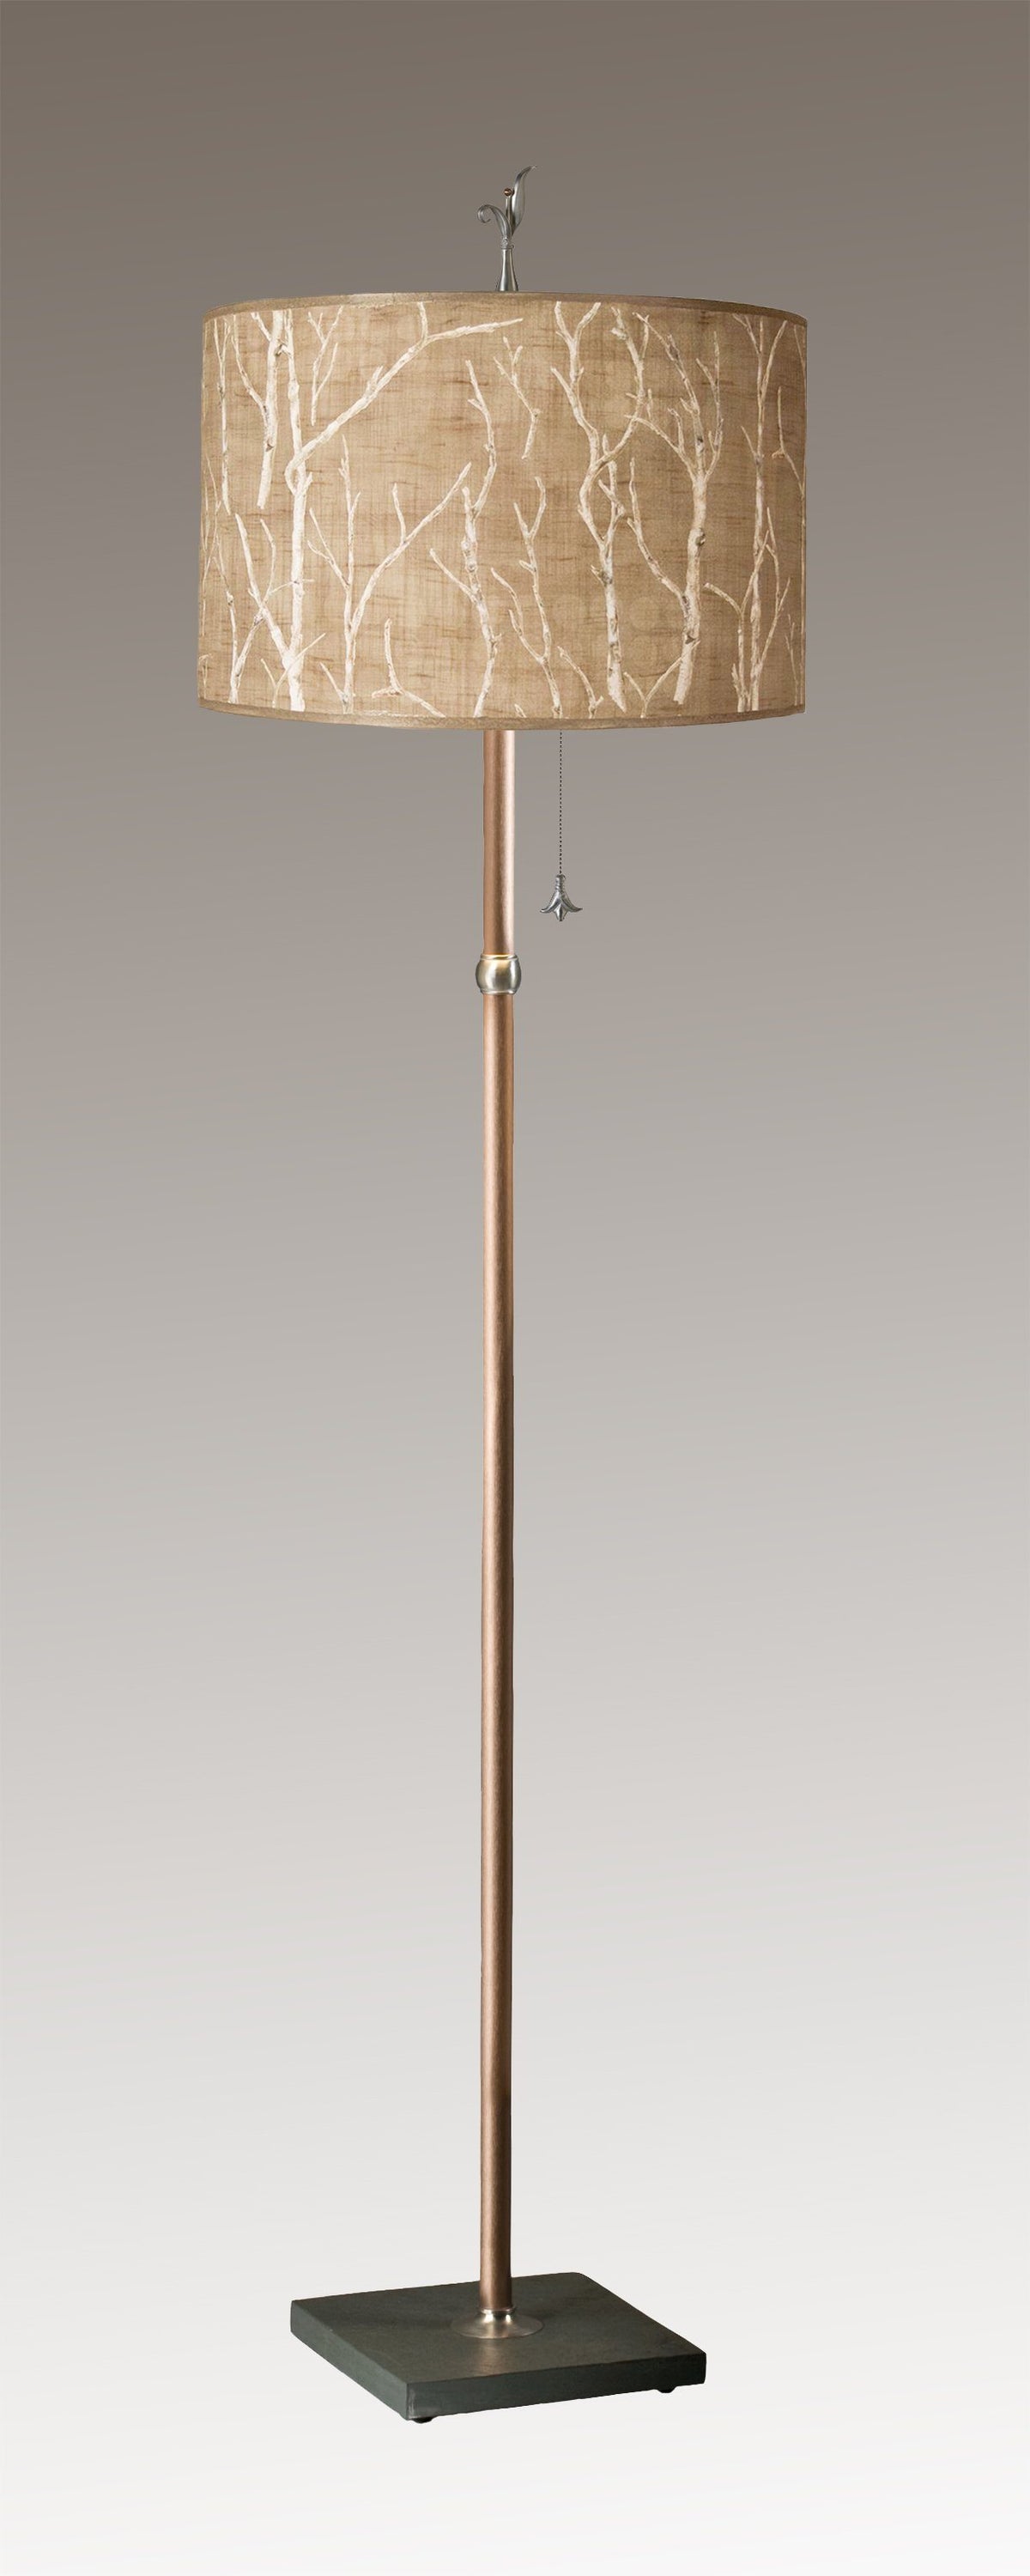 Copper Floor Lamp with Large Drum Shade in Twigs